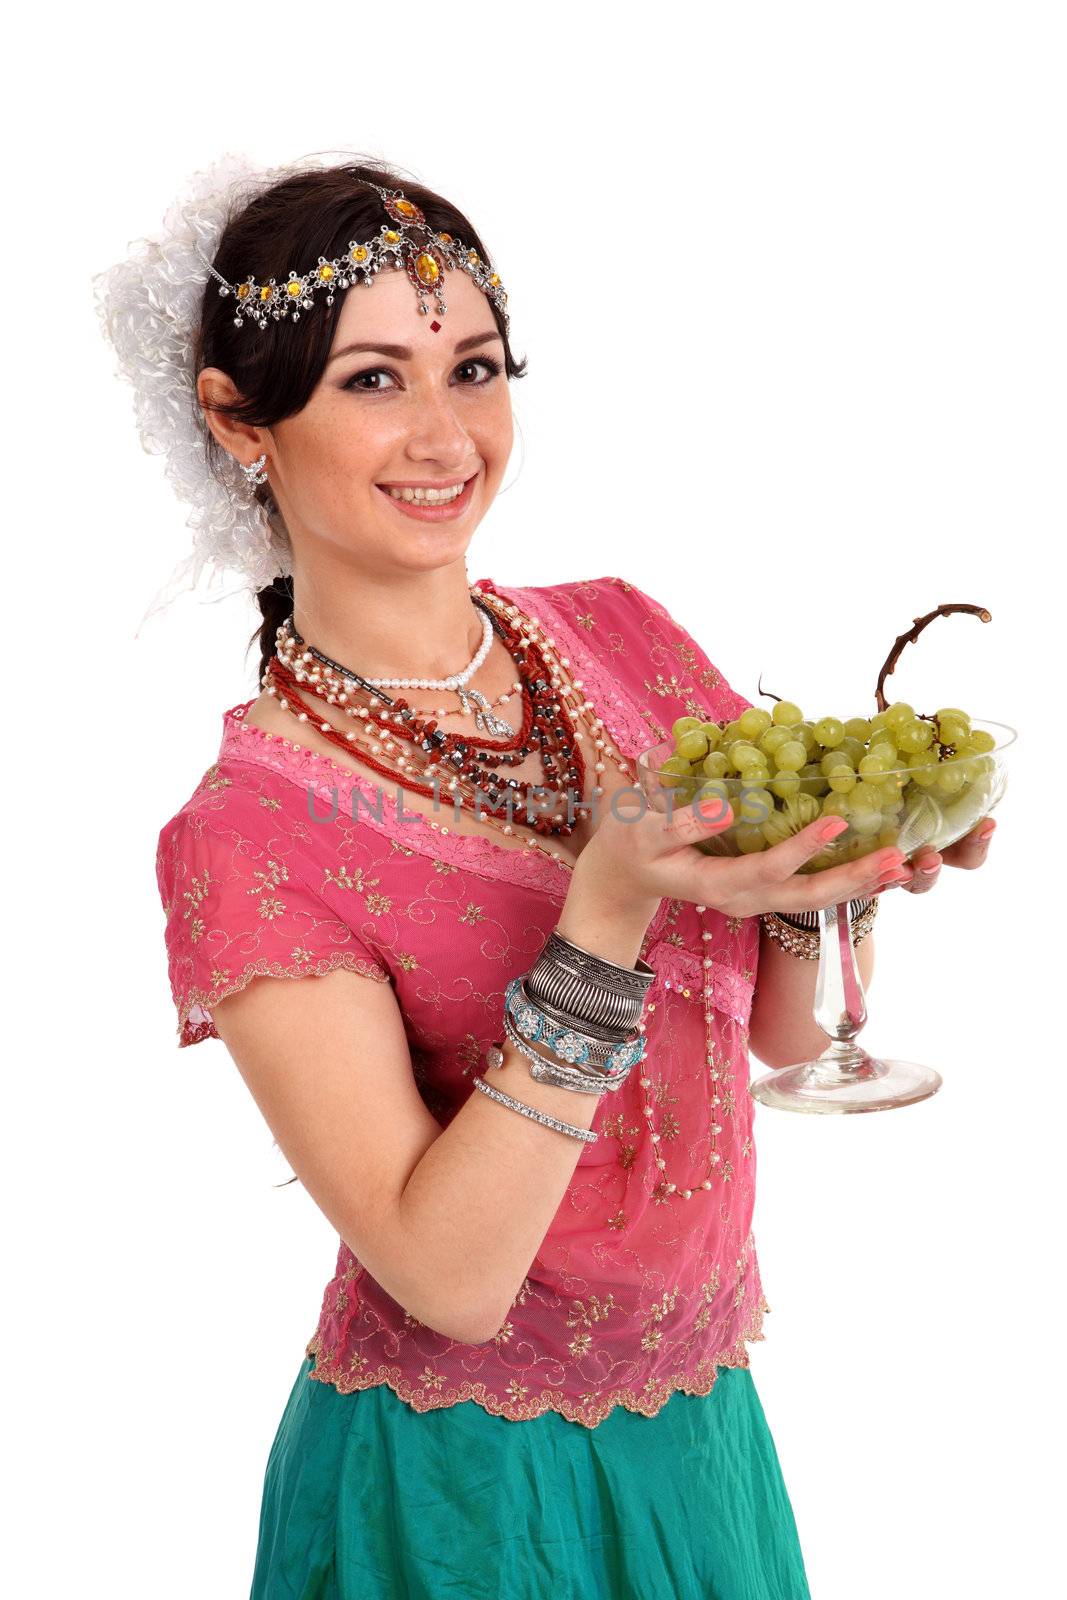 Young girl in the Indian national dress with grapes
